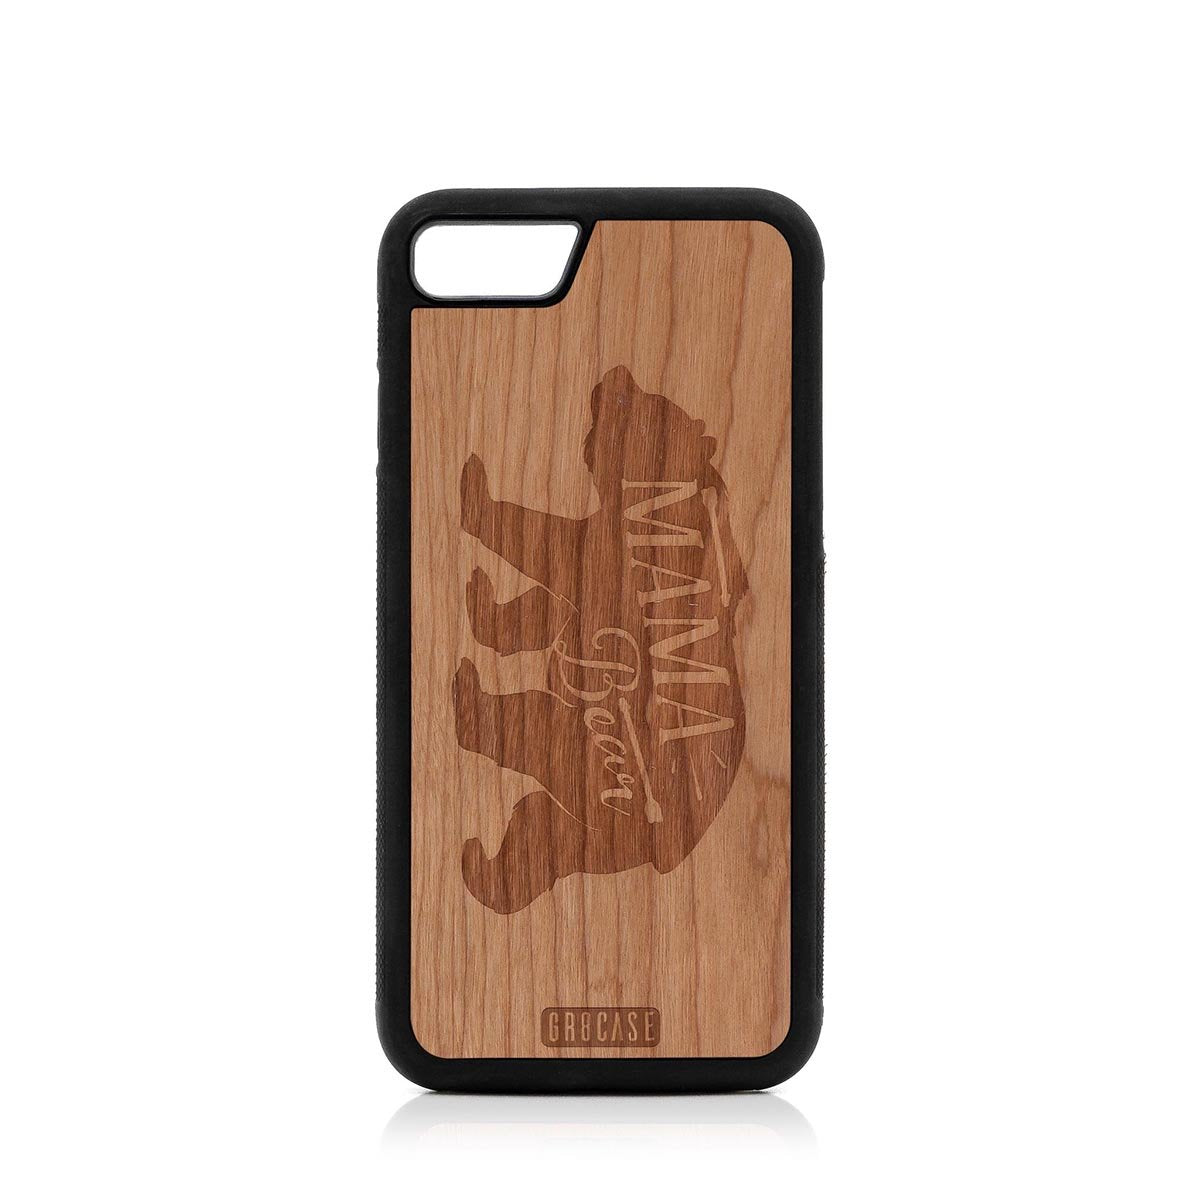 Mama Bear Design Wood Case For iPhone SE 2020 by GR8CASE